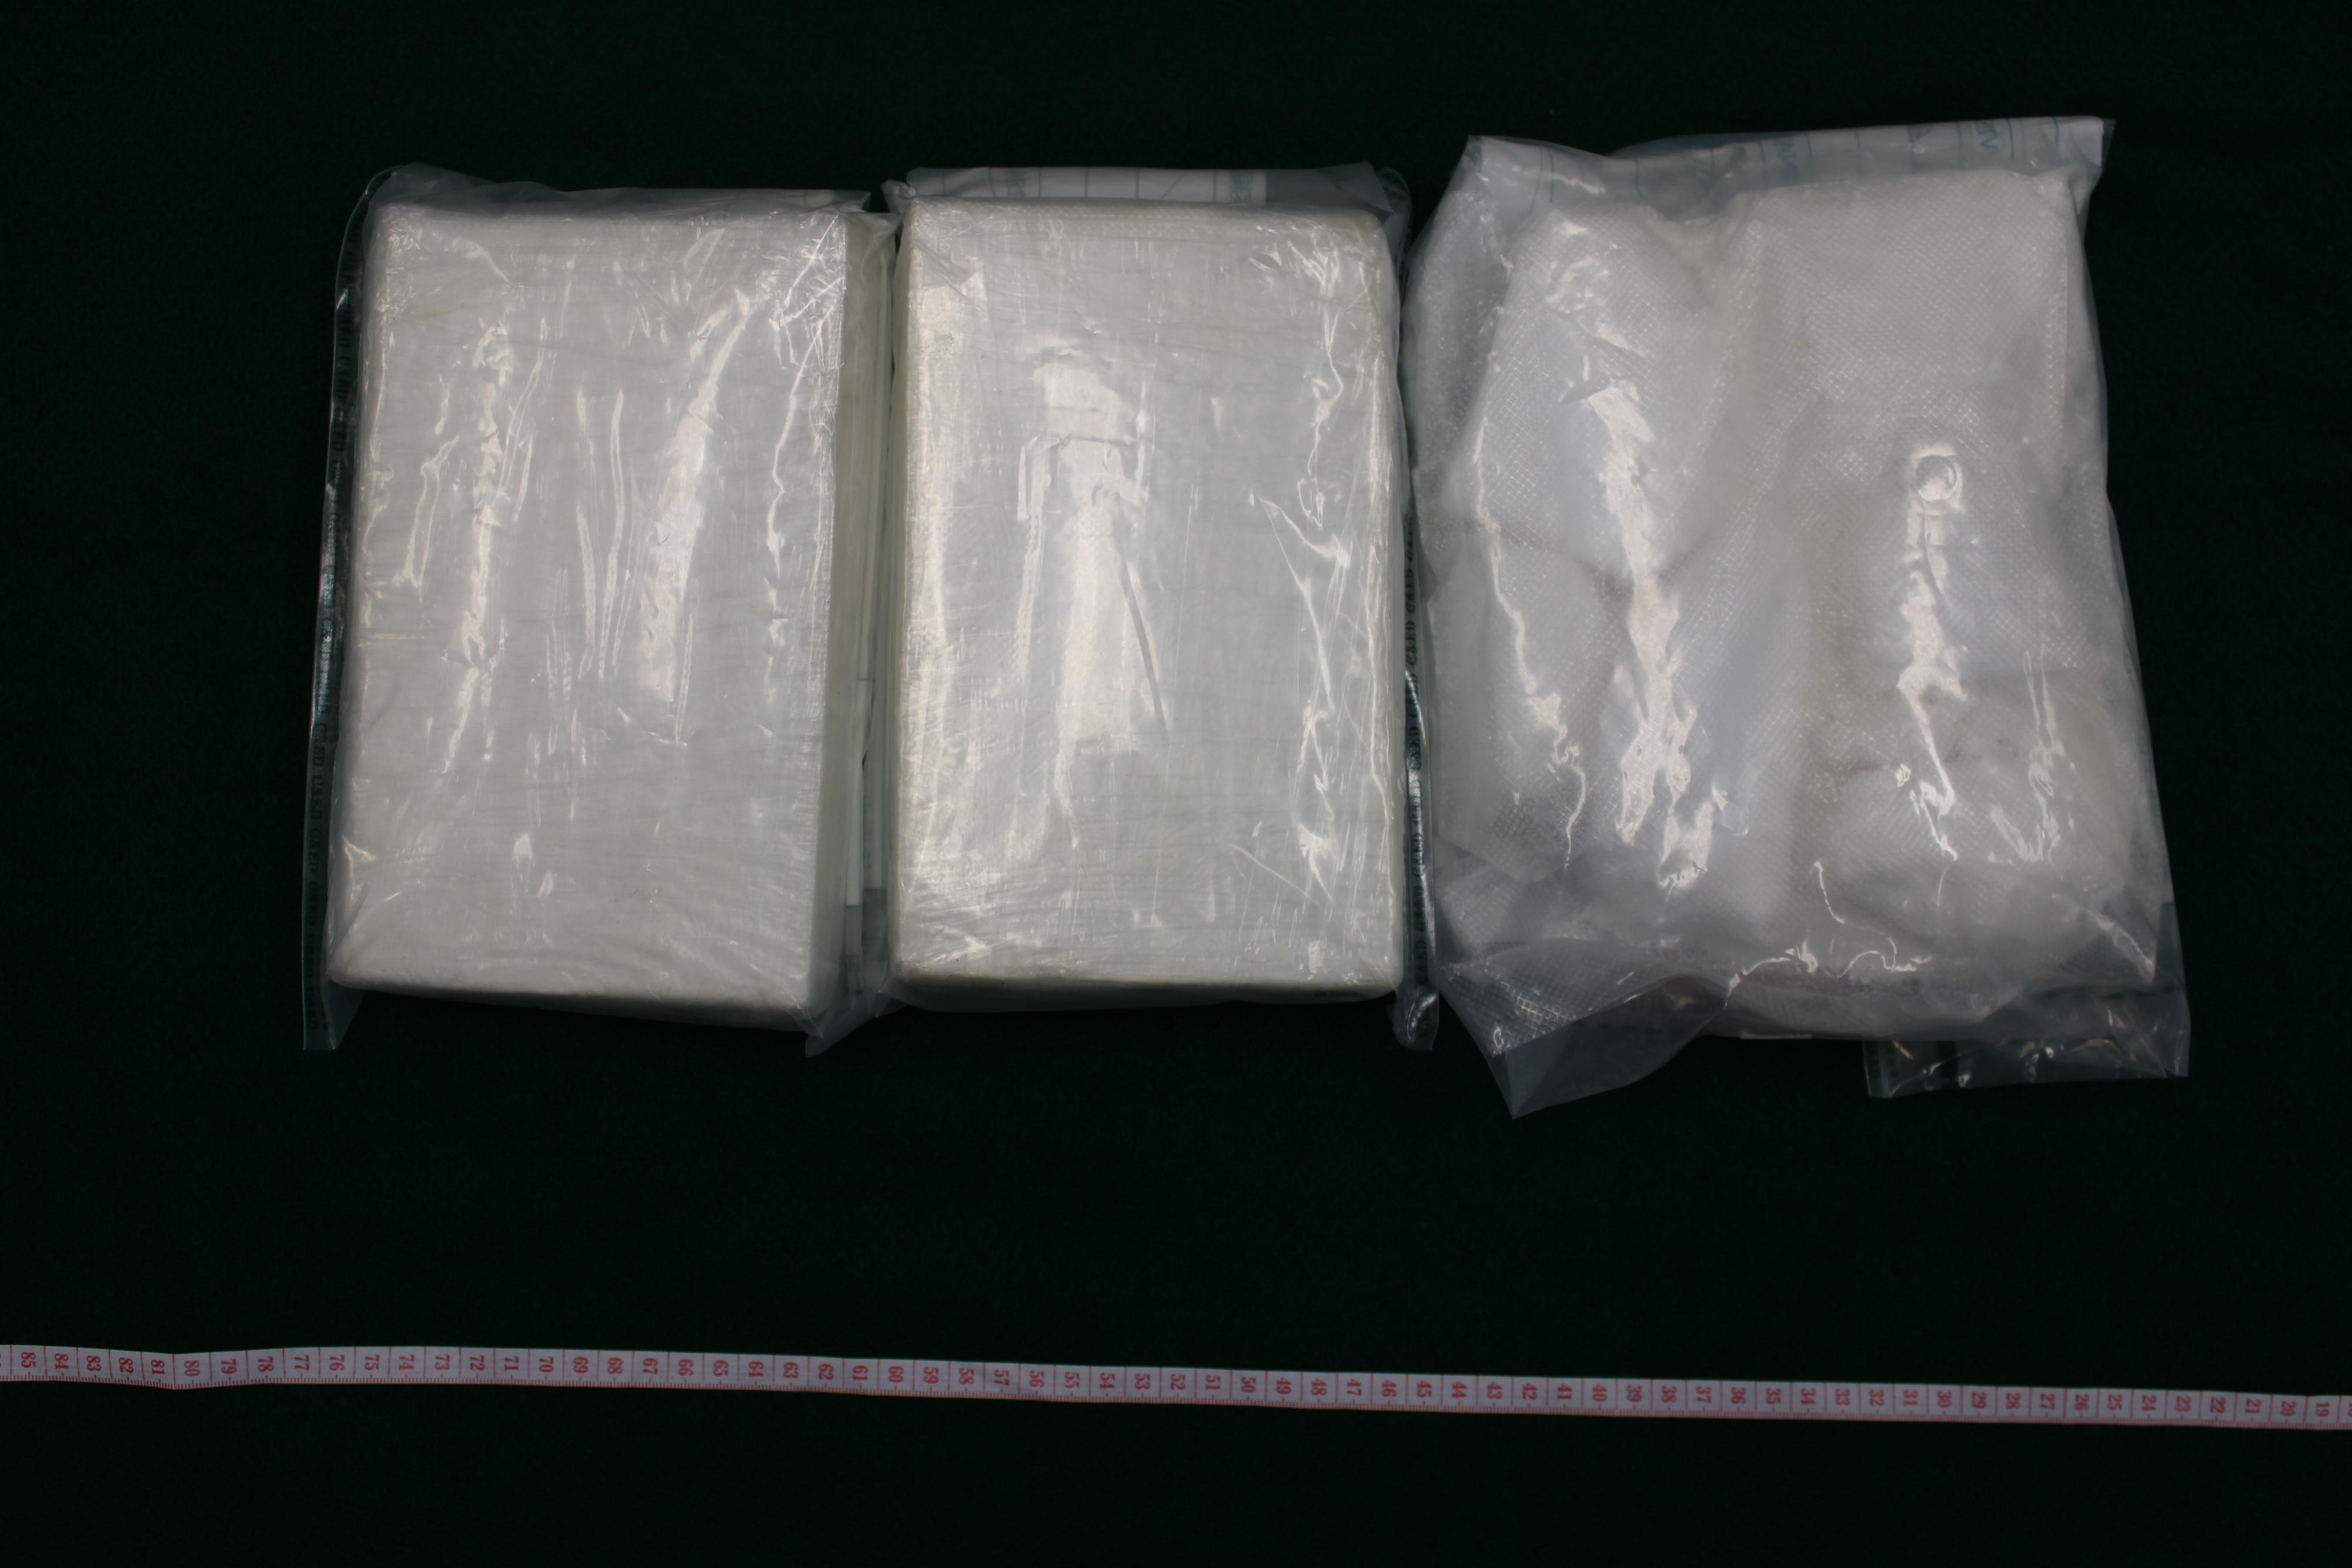 Hong Kong Customs detected two dangerous drugs cases in Tsuen Wan and Kwun Tong on July 22 and yesterday (August 8) and seized a total of about 7 kilograms of suspected cocaine with an estimated market value of about $6.4 million. Photo shows the suspected cocaine seized by Customs officers in Tsuen Wan, weighing about 3kg.